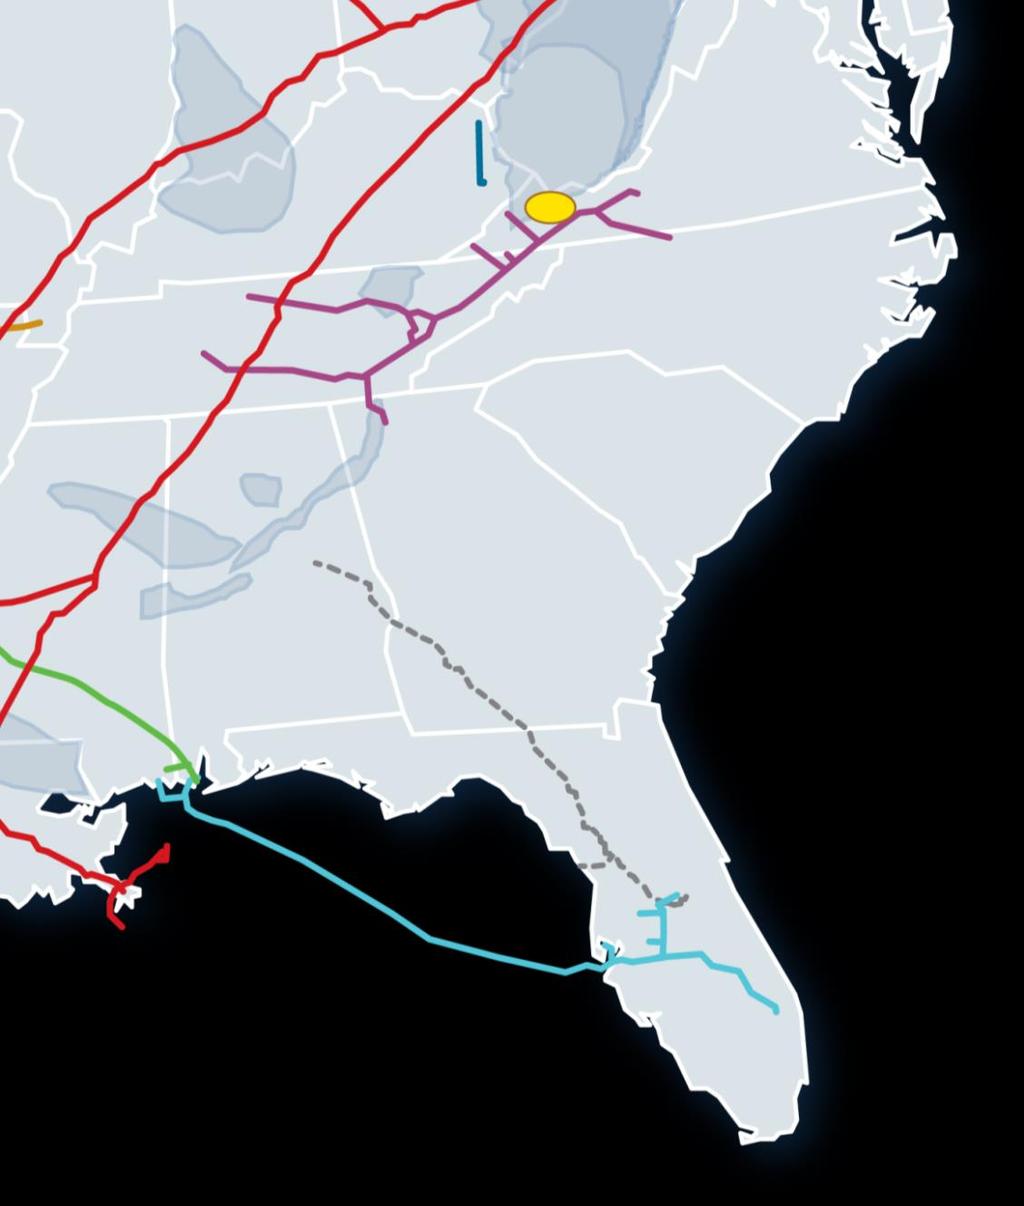 Loudon and Sabal Trail Loudon Sabal Trail Serving Southeast power generation growth Loudon: East Tennessee expansion to serve a